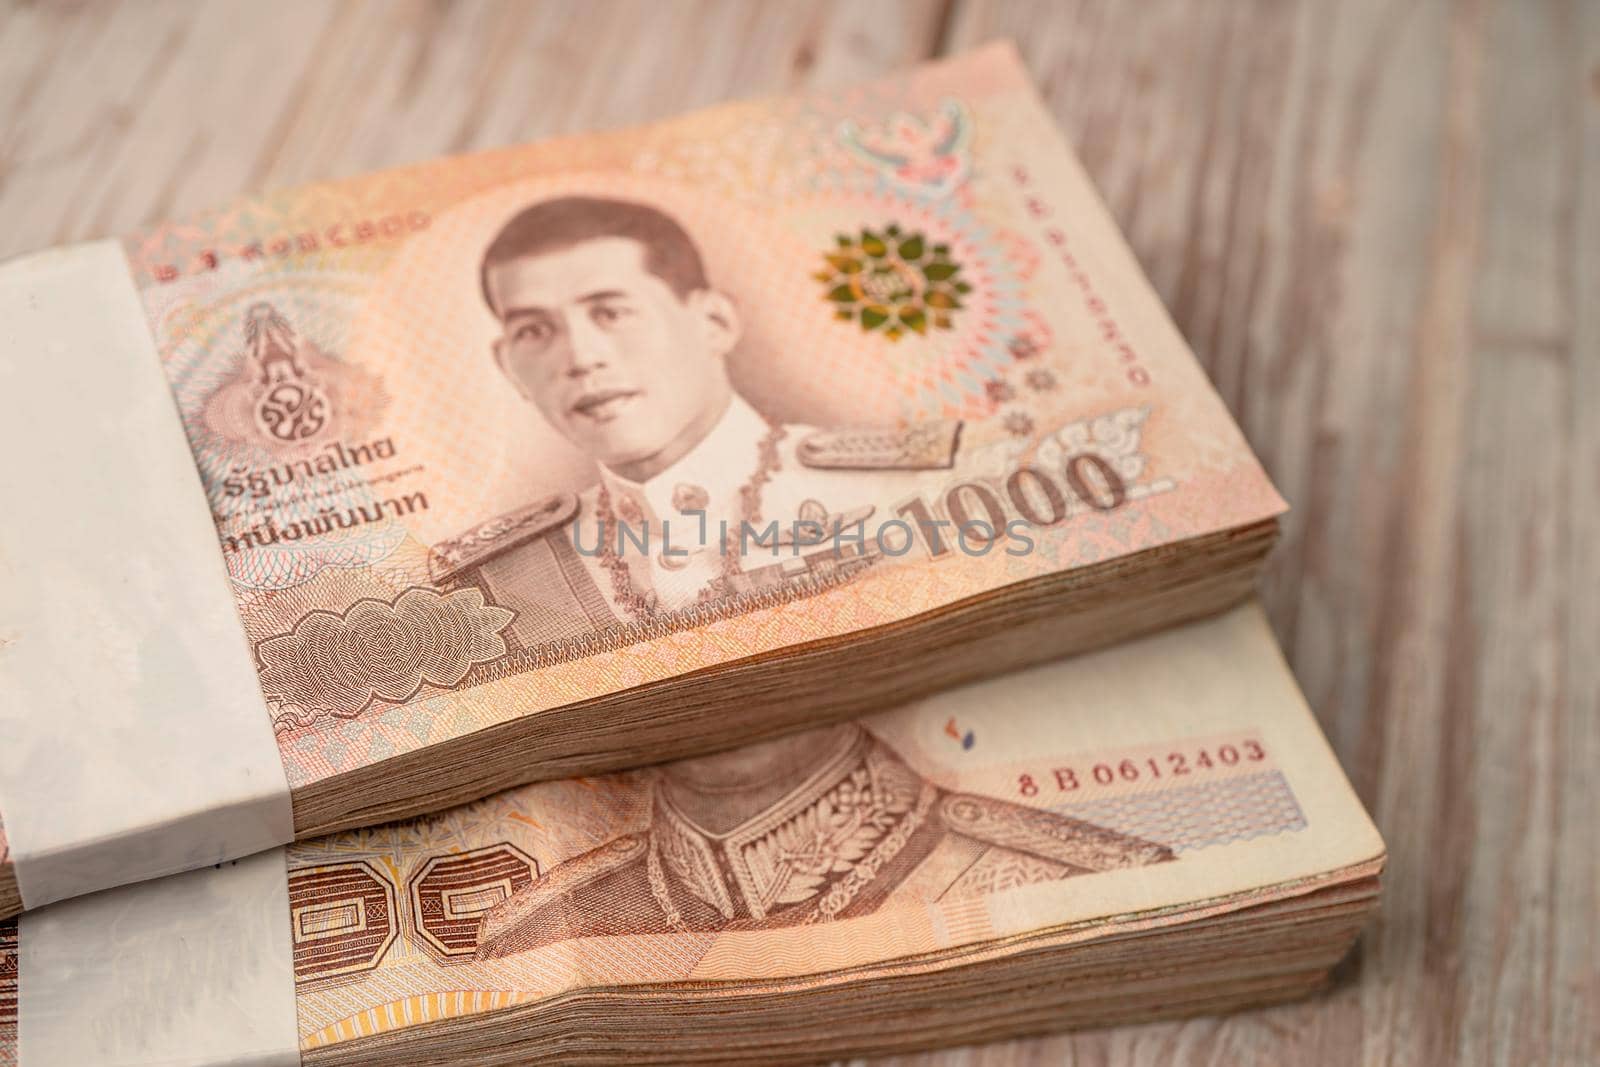 Stack of Thai baht banknotes on wooden background, business saving finance investment concept.